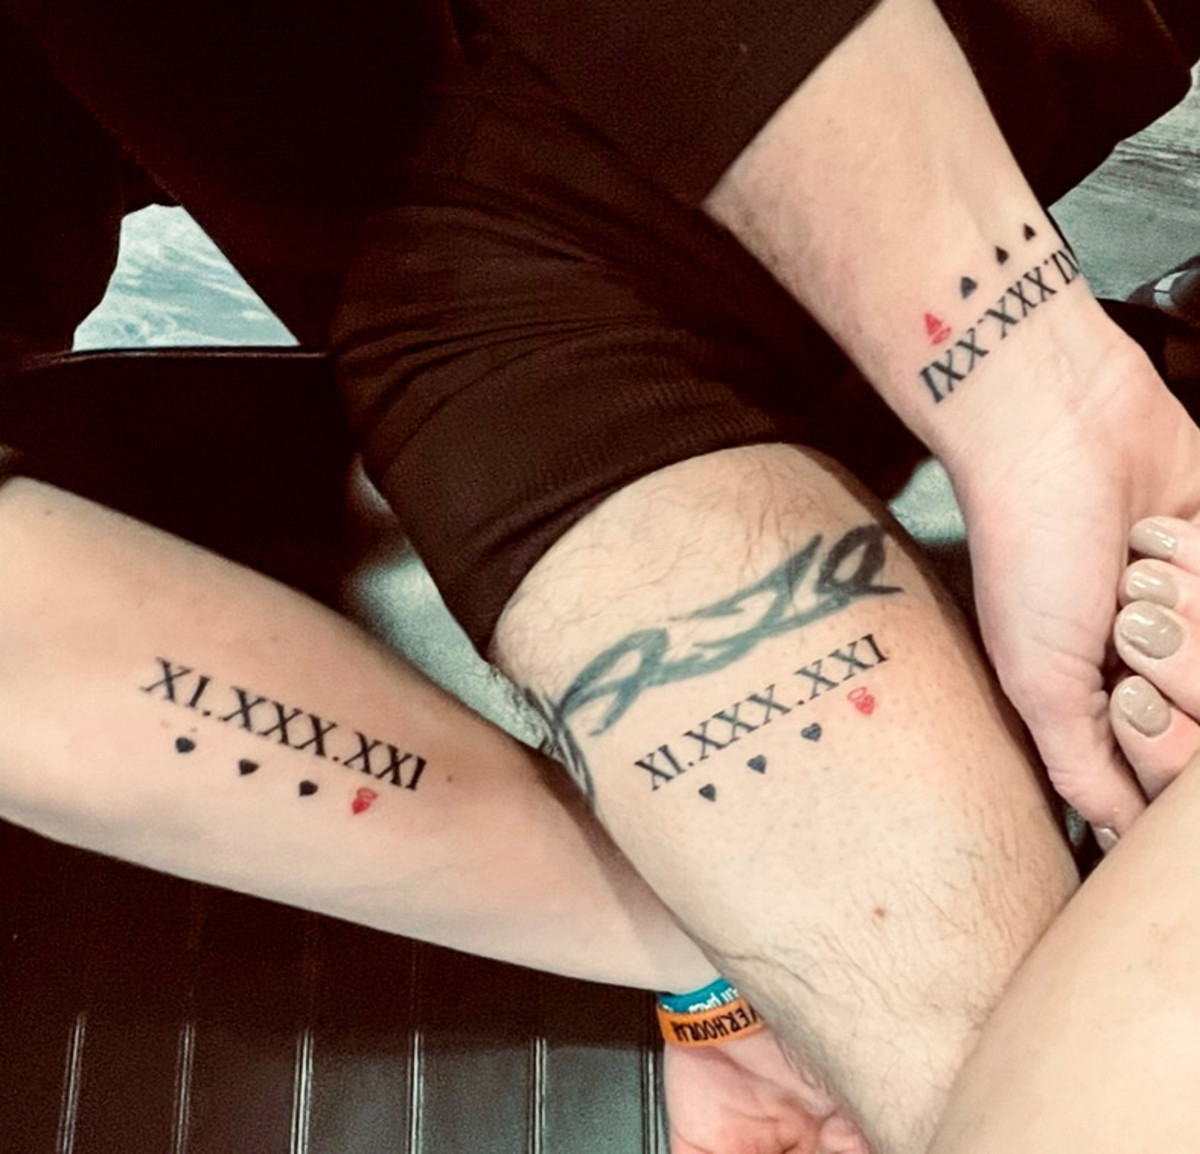 Meghan, Keegan and Chad each got inked to remember the shooting, with a special nod to Justin.